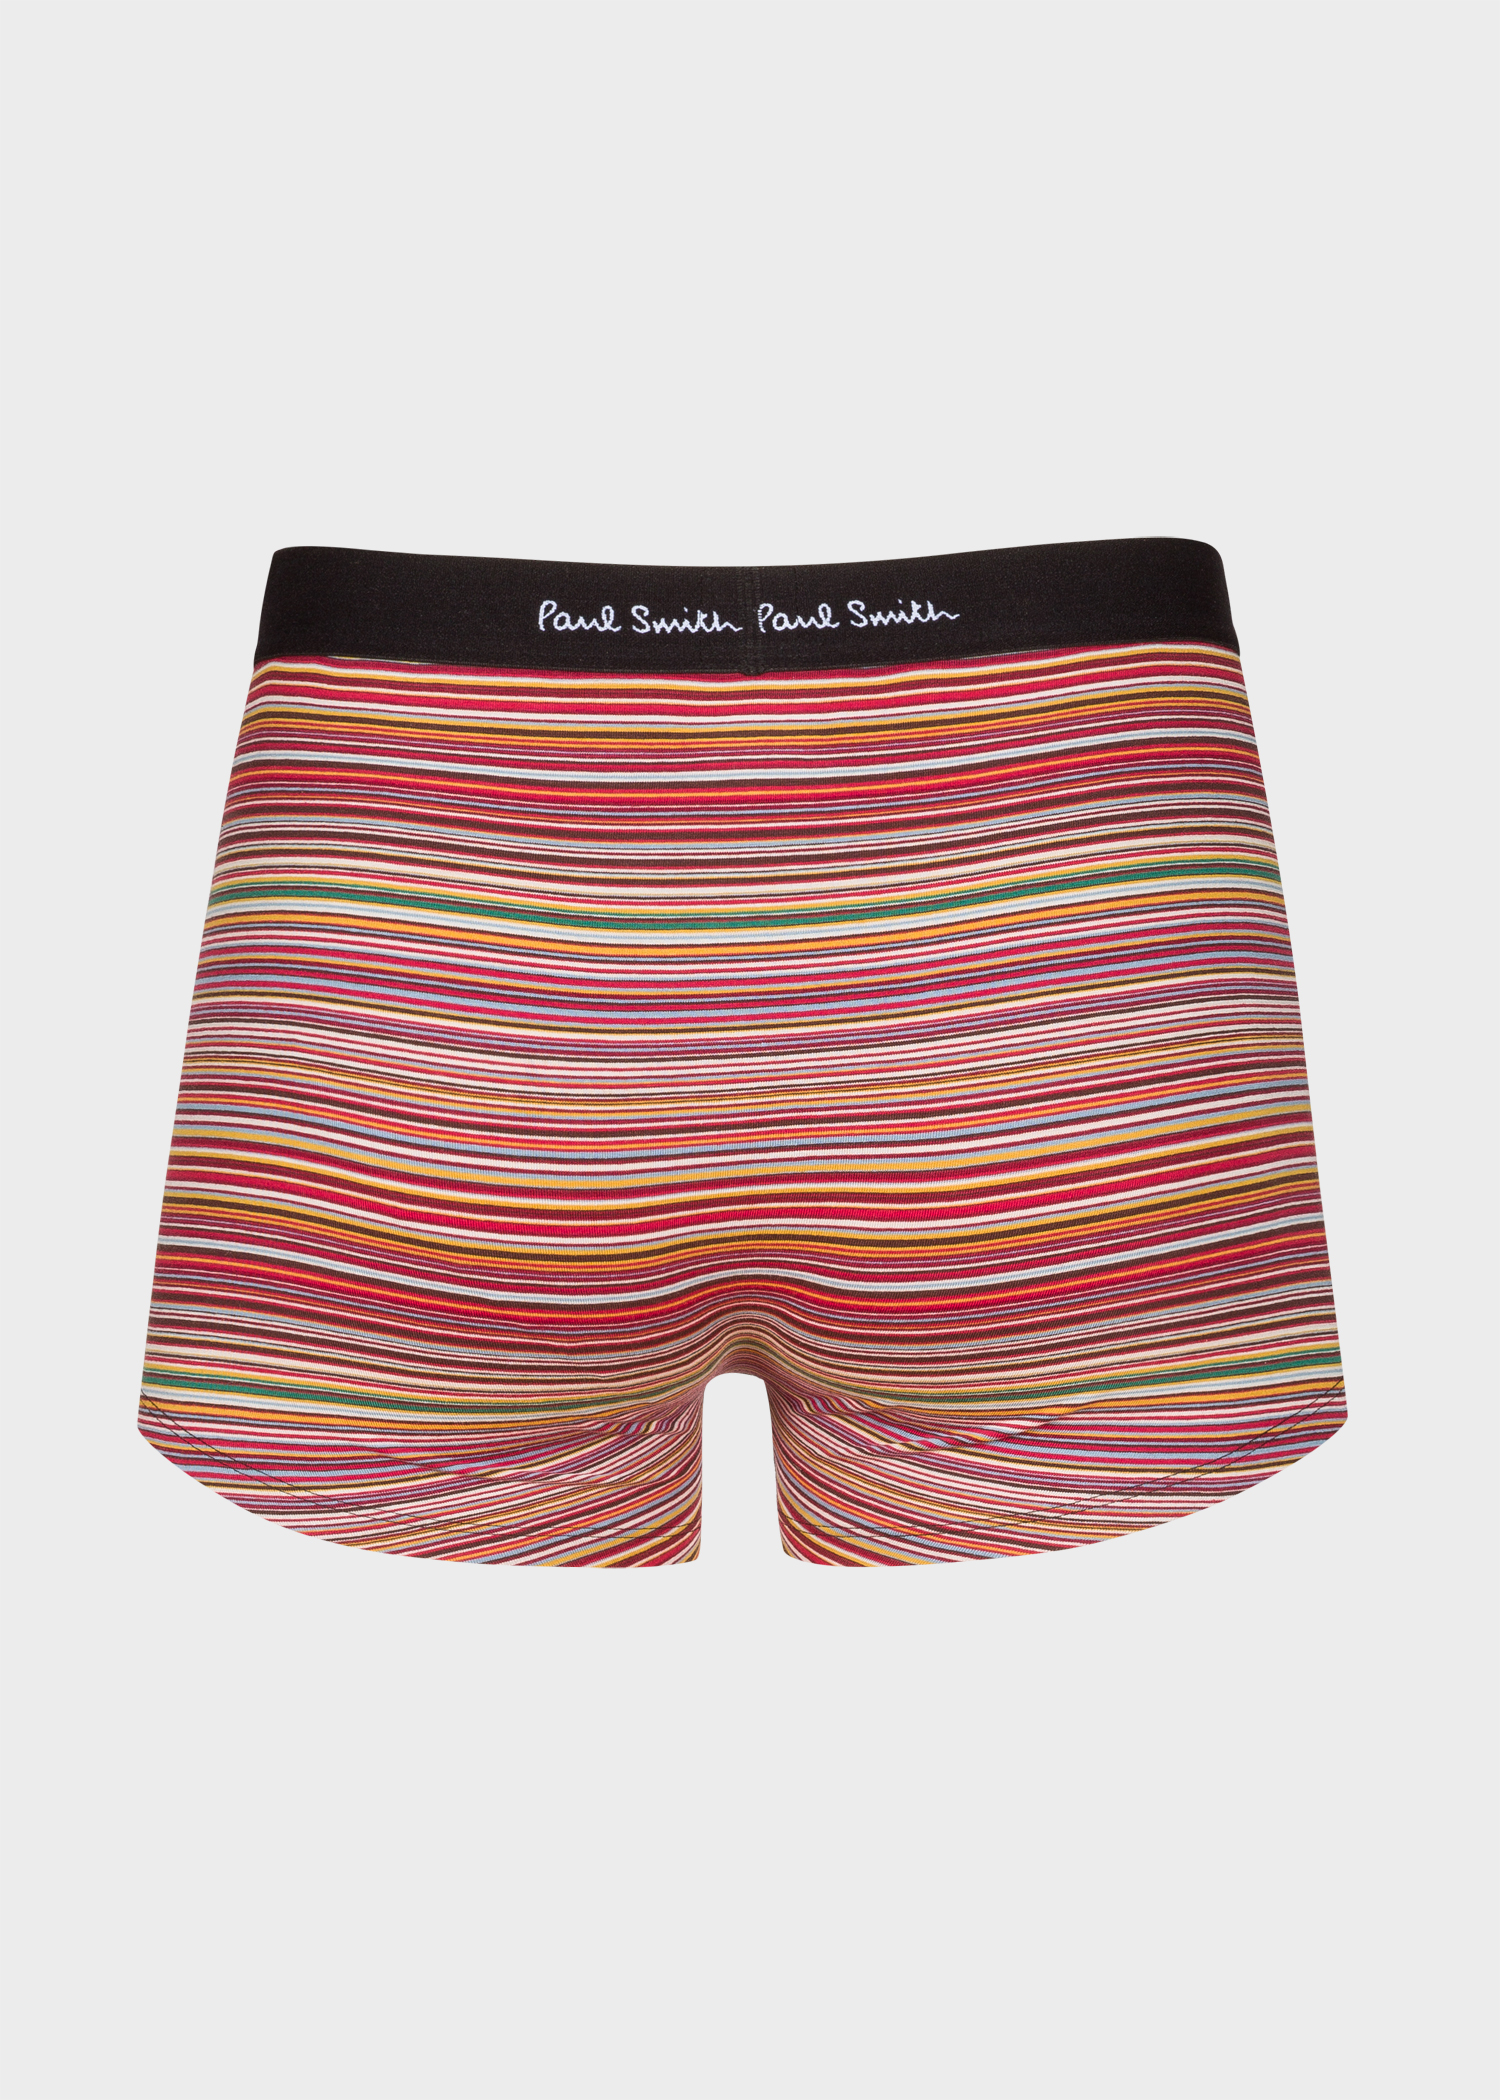 Boxer Brief Back view - Men's Black Mixed Stripe Boxer Briefs Three Pack Paul Smith